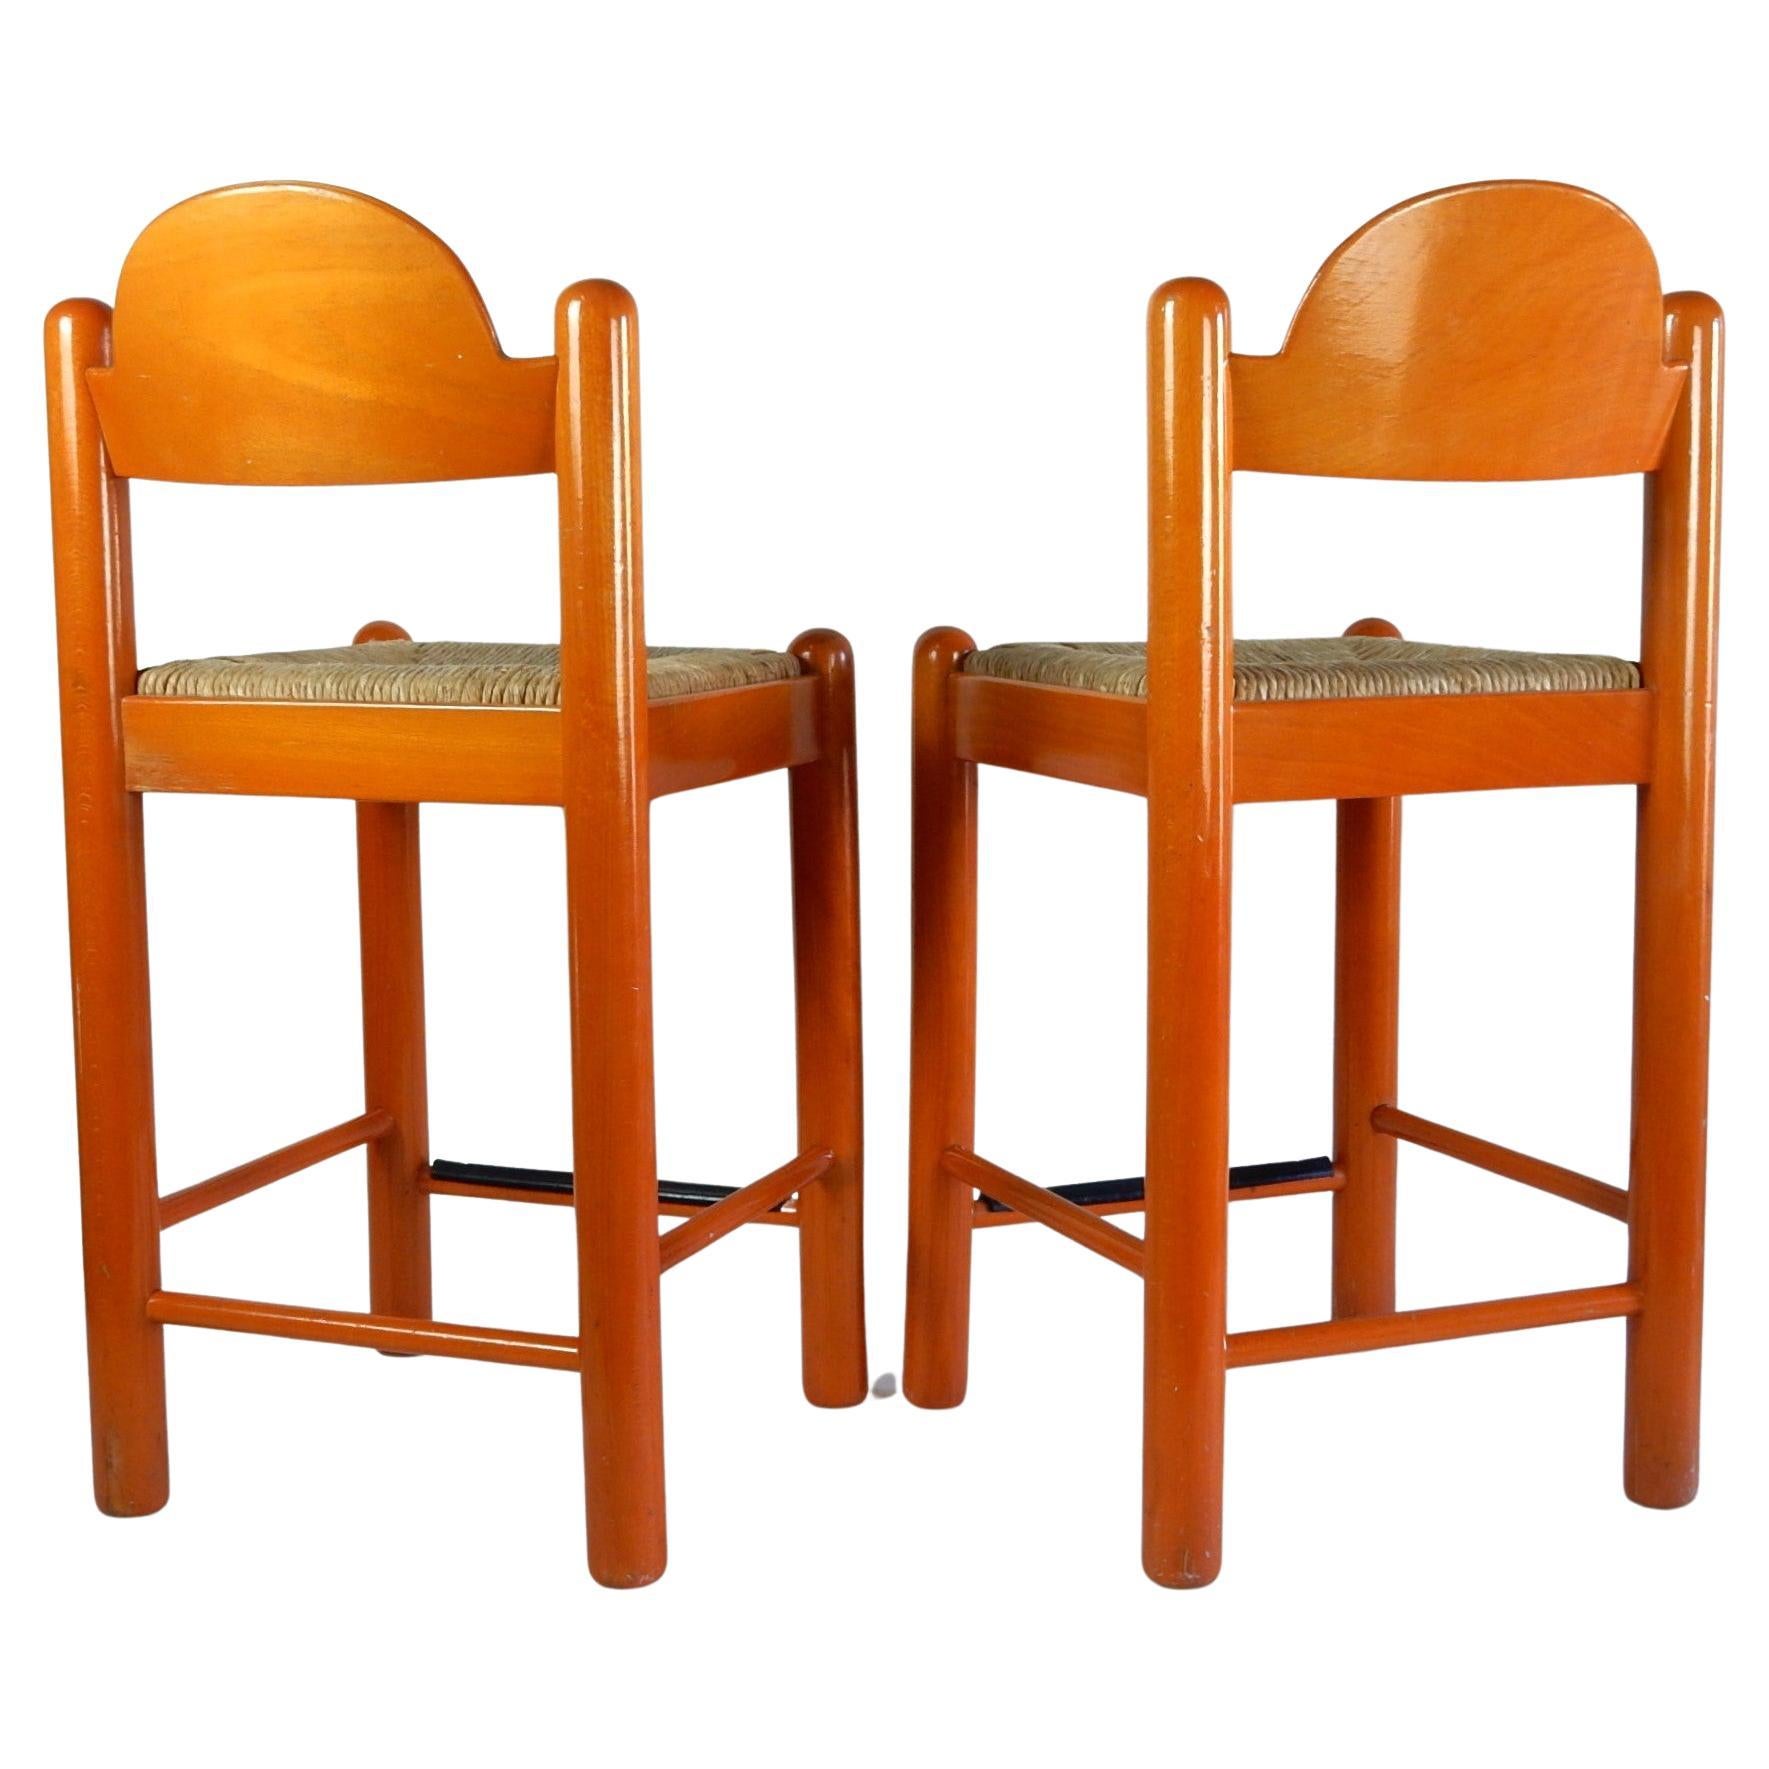 Pair of circa 1970's orange dyed Birchwood bar stools designed by Hank Lowenstein.
Hand woven rush seating. Heavy well crafted stools.
Both are solid showing signs of use but not abuse.
Clean and ready for placement.